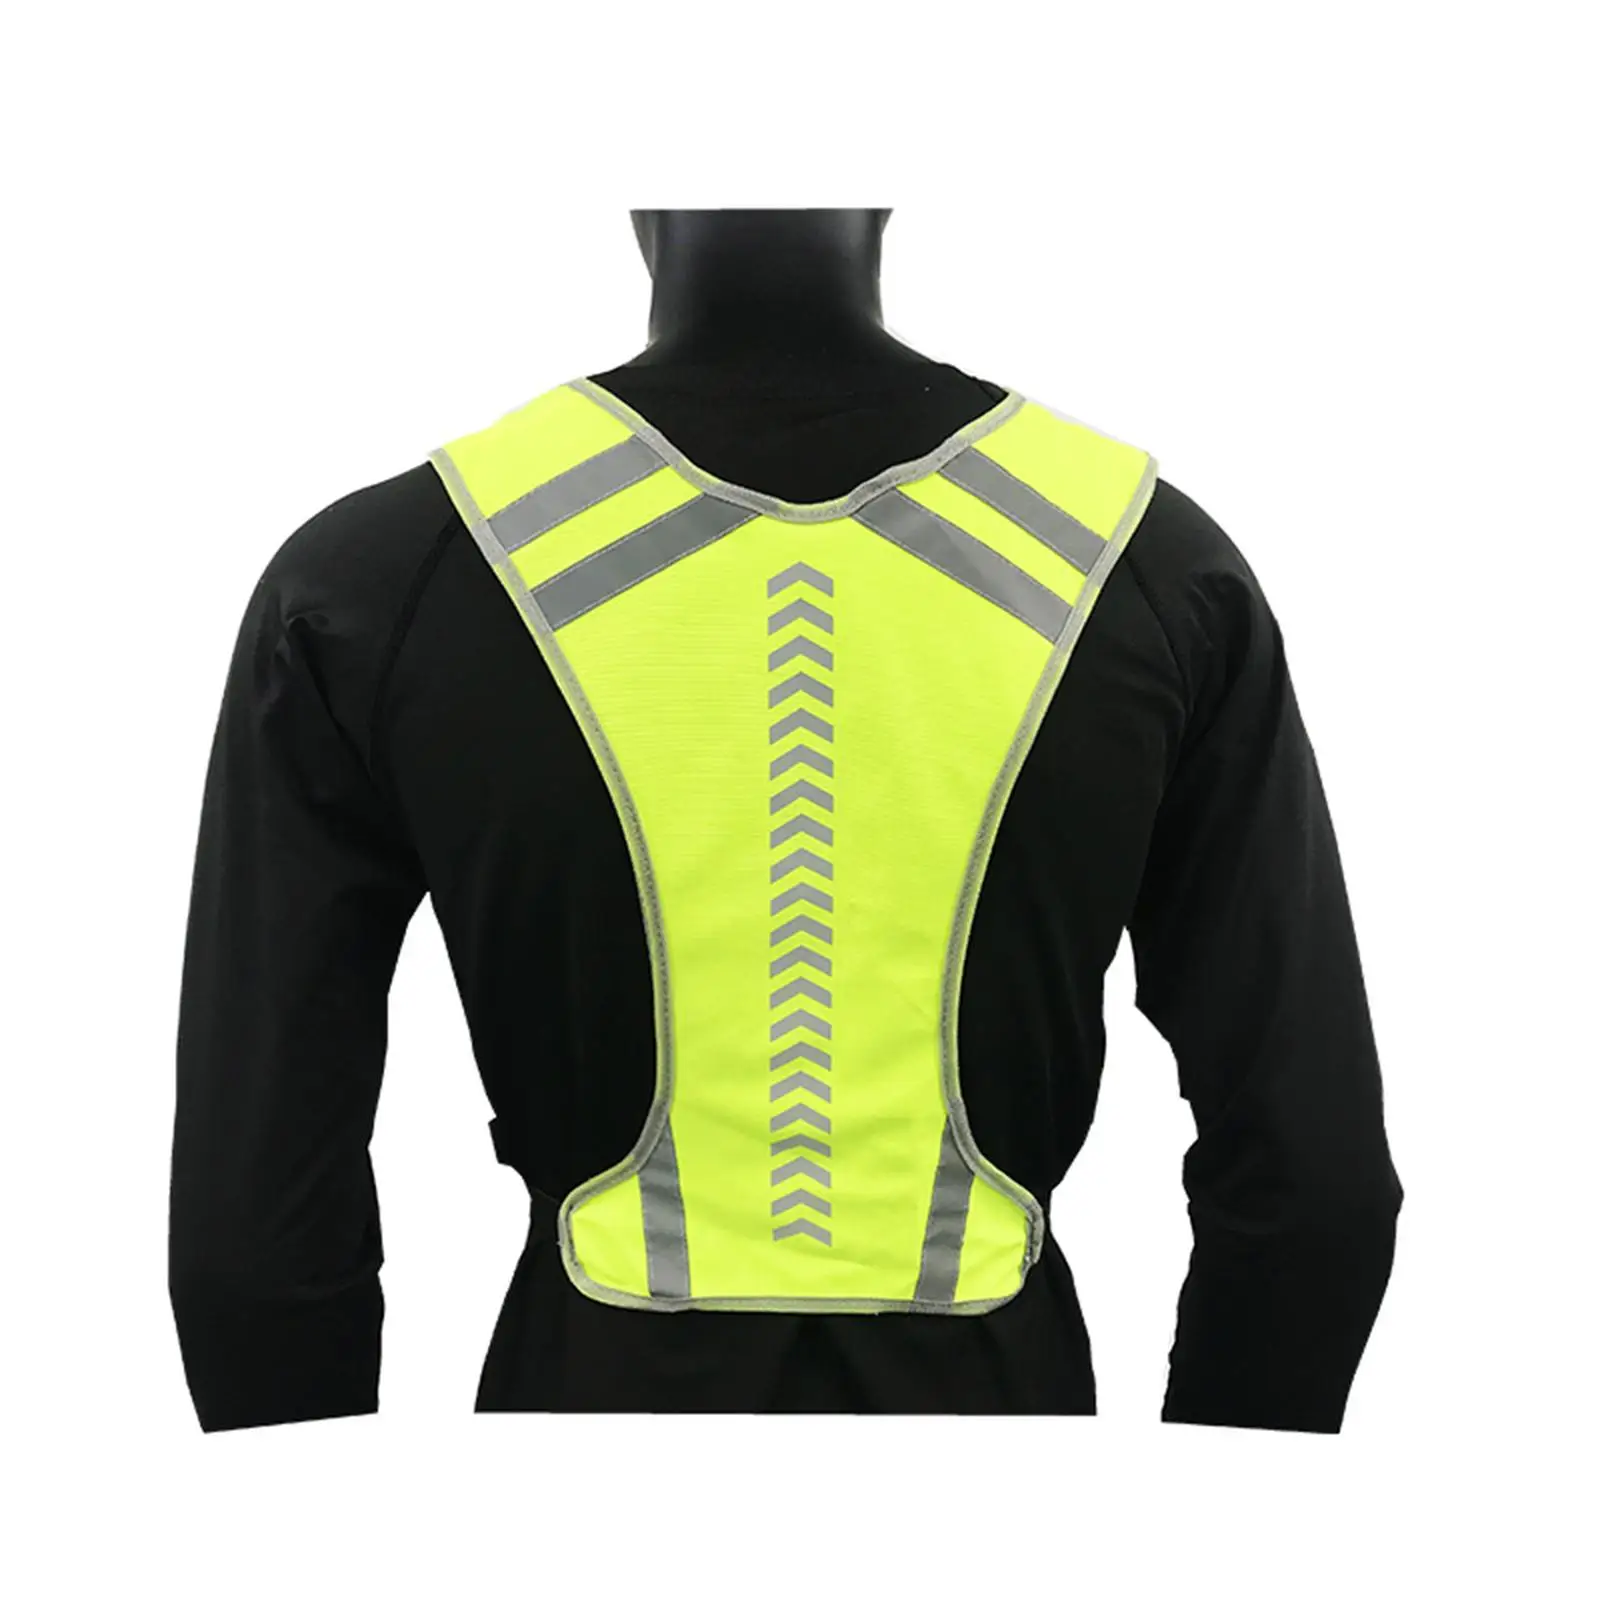 

Reflective Safety Vest High Visibility Sleeveless Garment for Runner Unisex Outdoor Activities